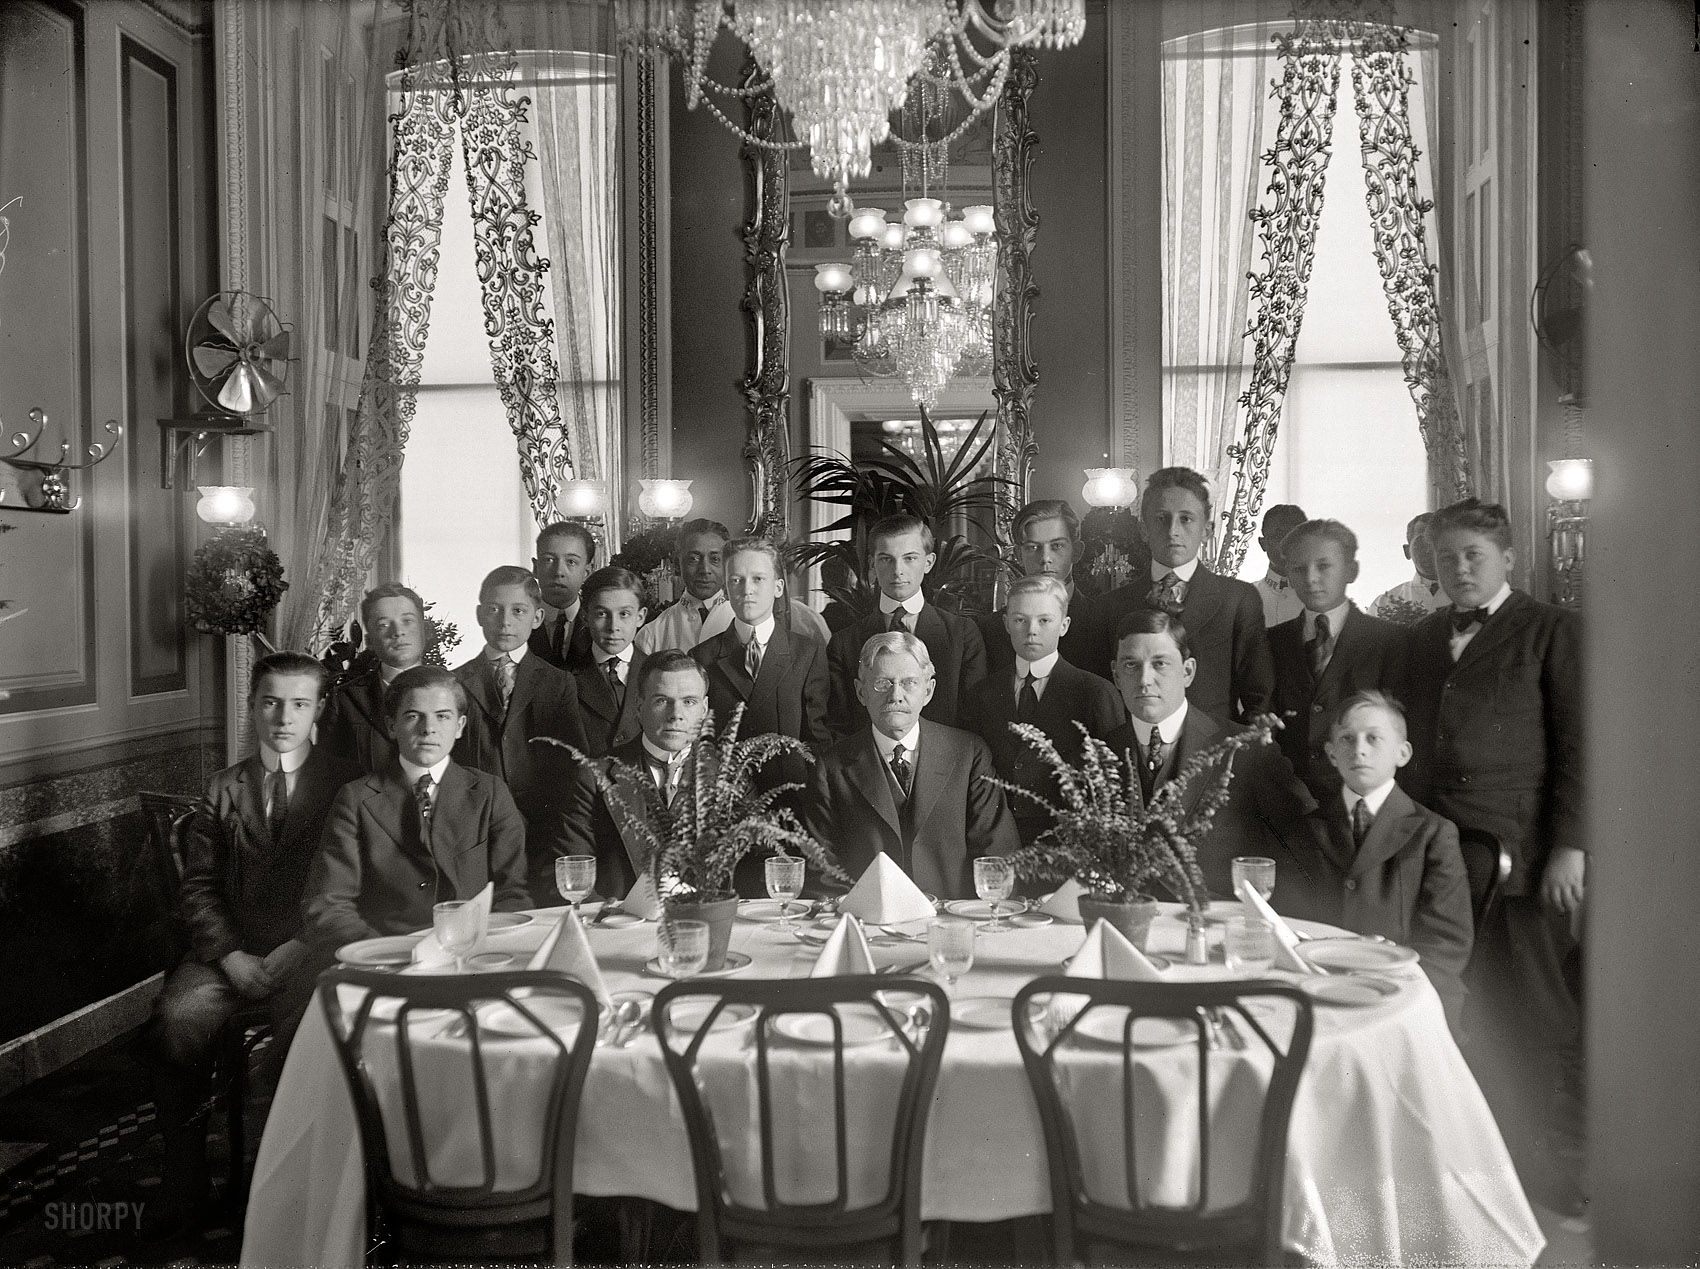 1916. "Senate pages. Marshall, center, giving dinner to pages." I know you'll all be on your very best behavior. Harris & Ewing Collection negative. View full size.